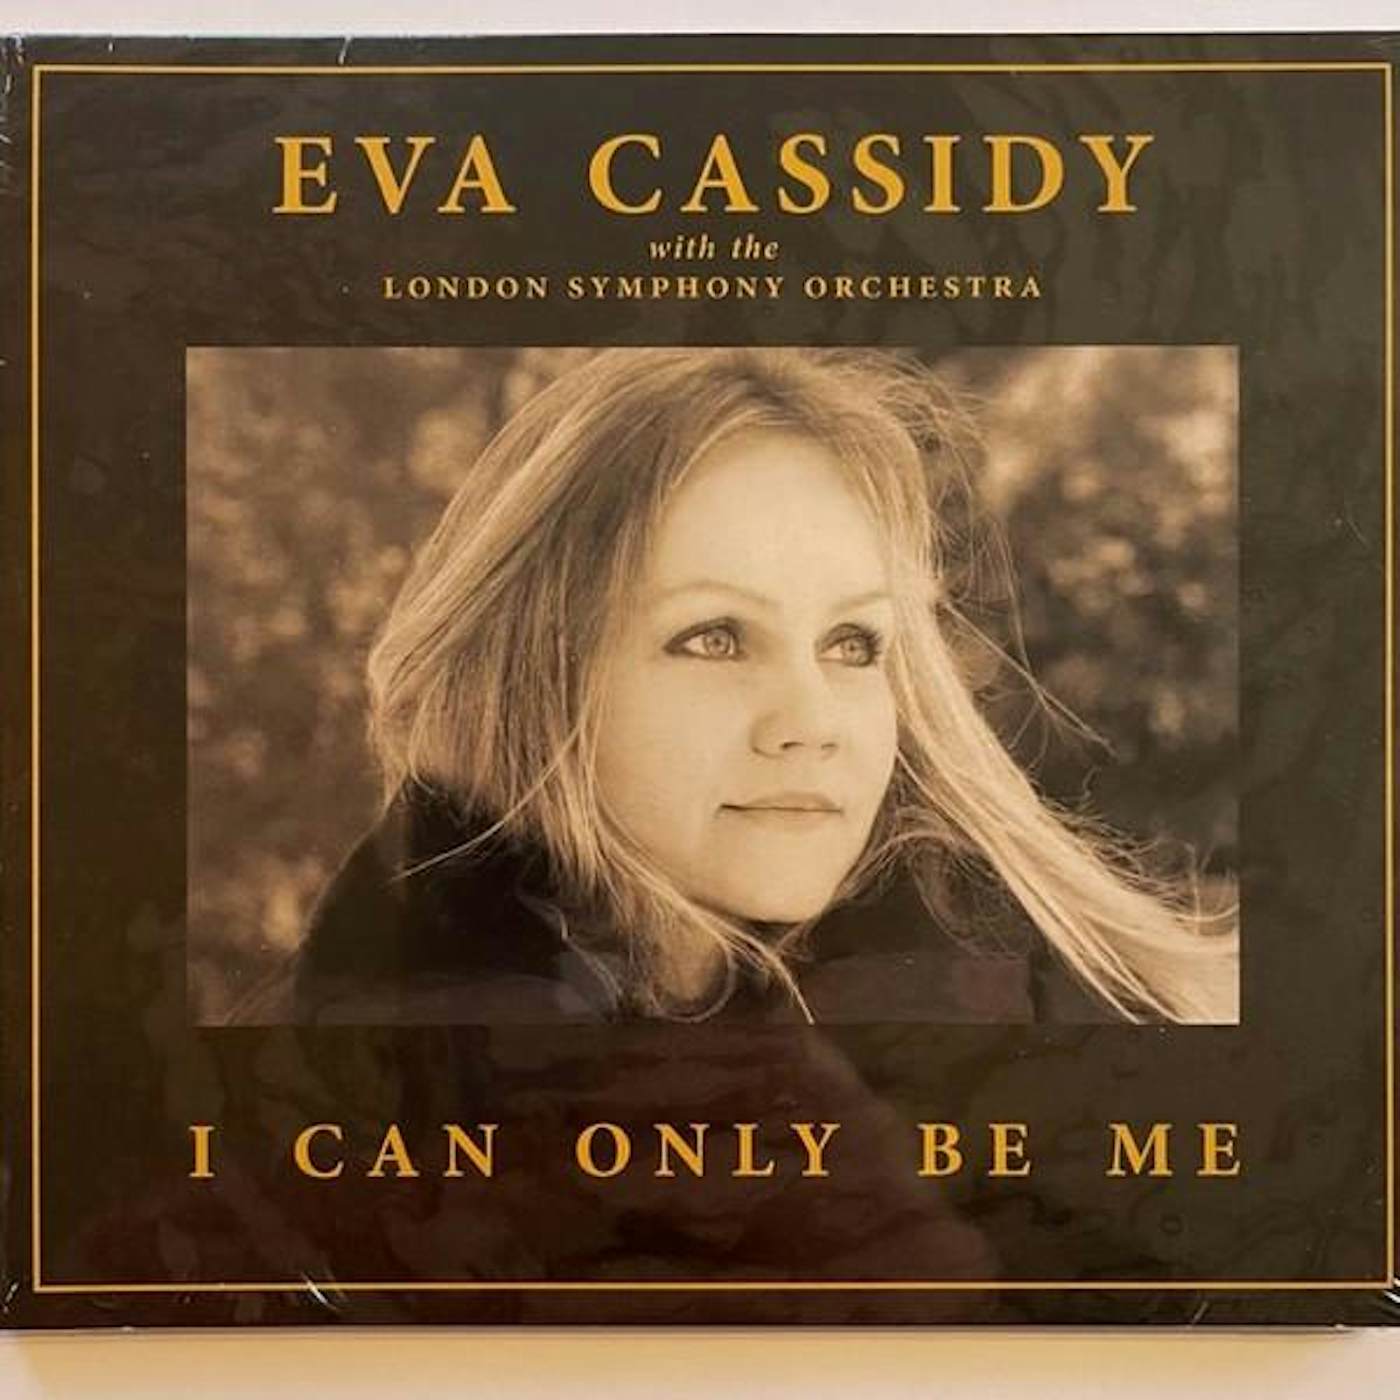 Eva Cassidy I CAN ONLY BE ME CD